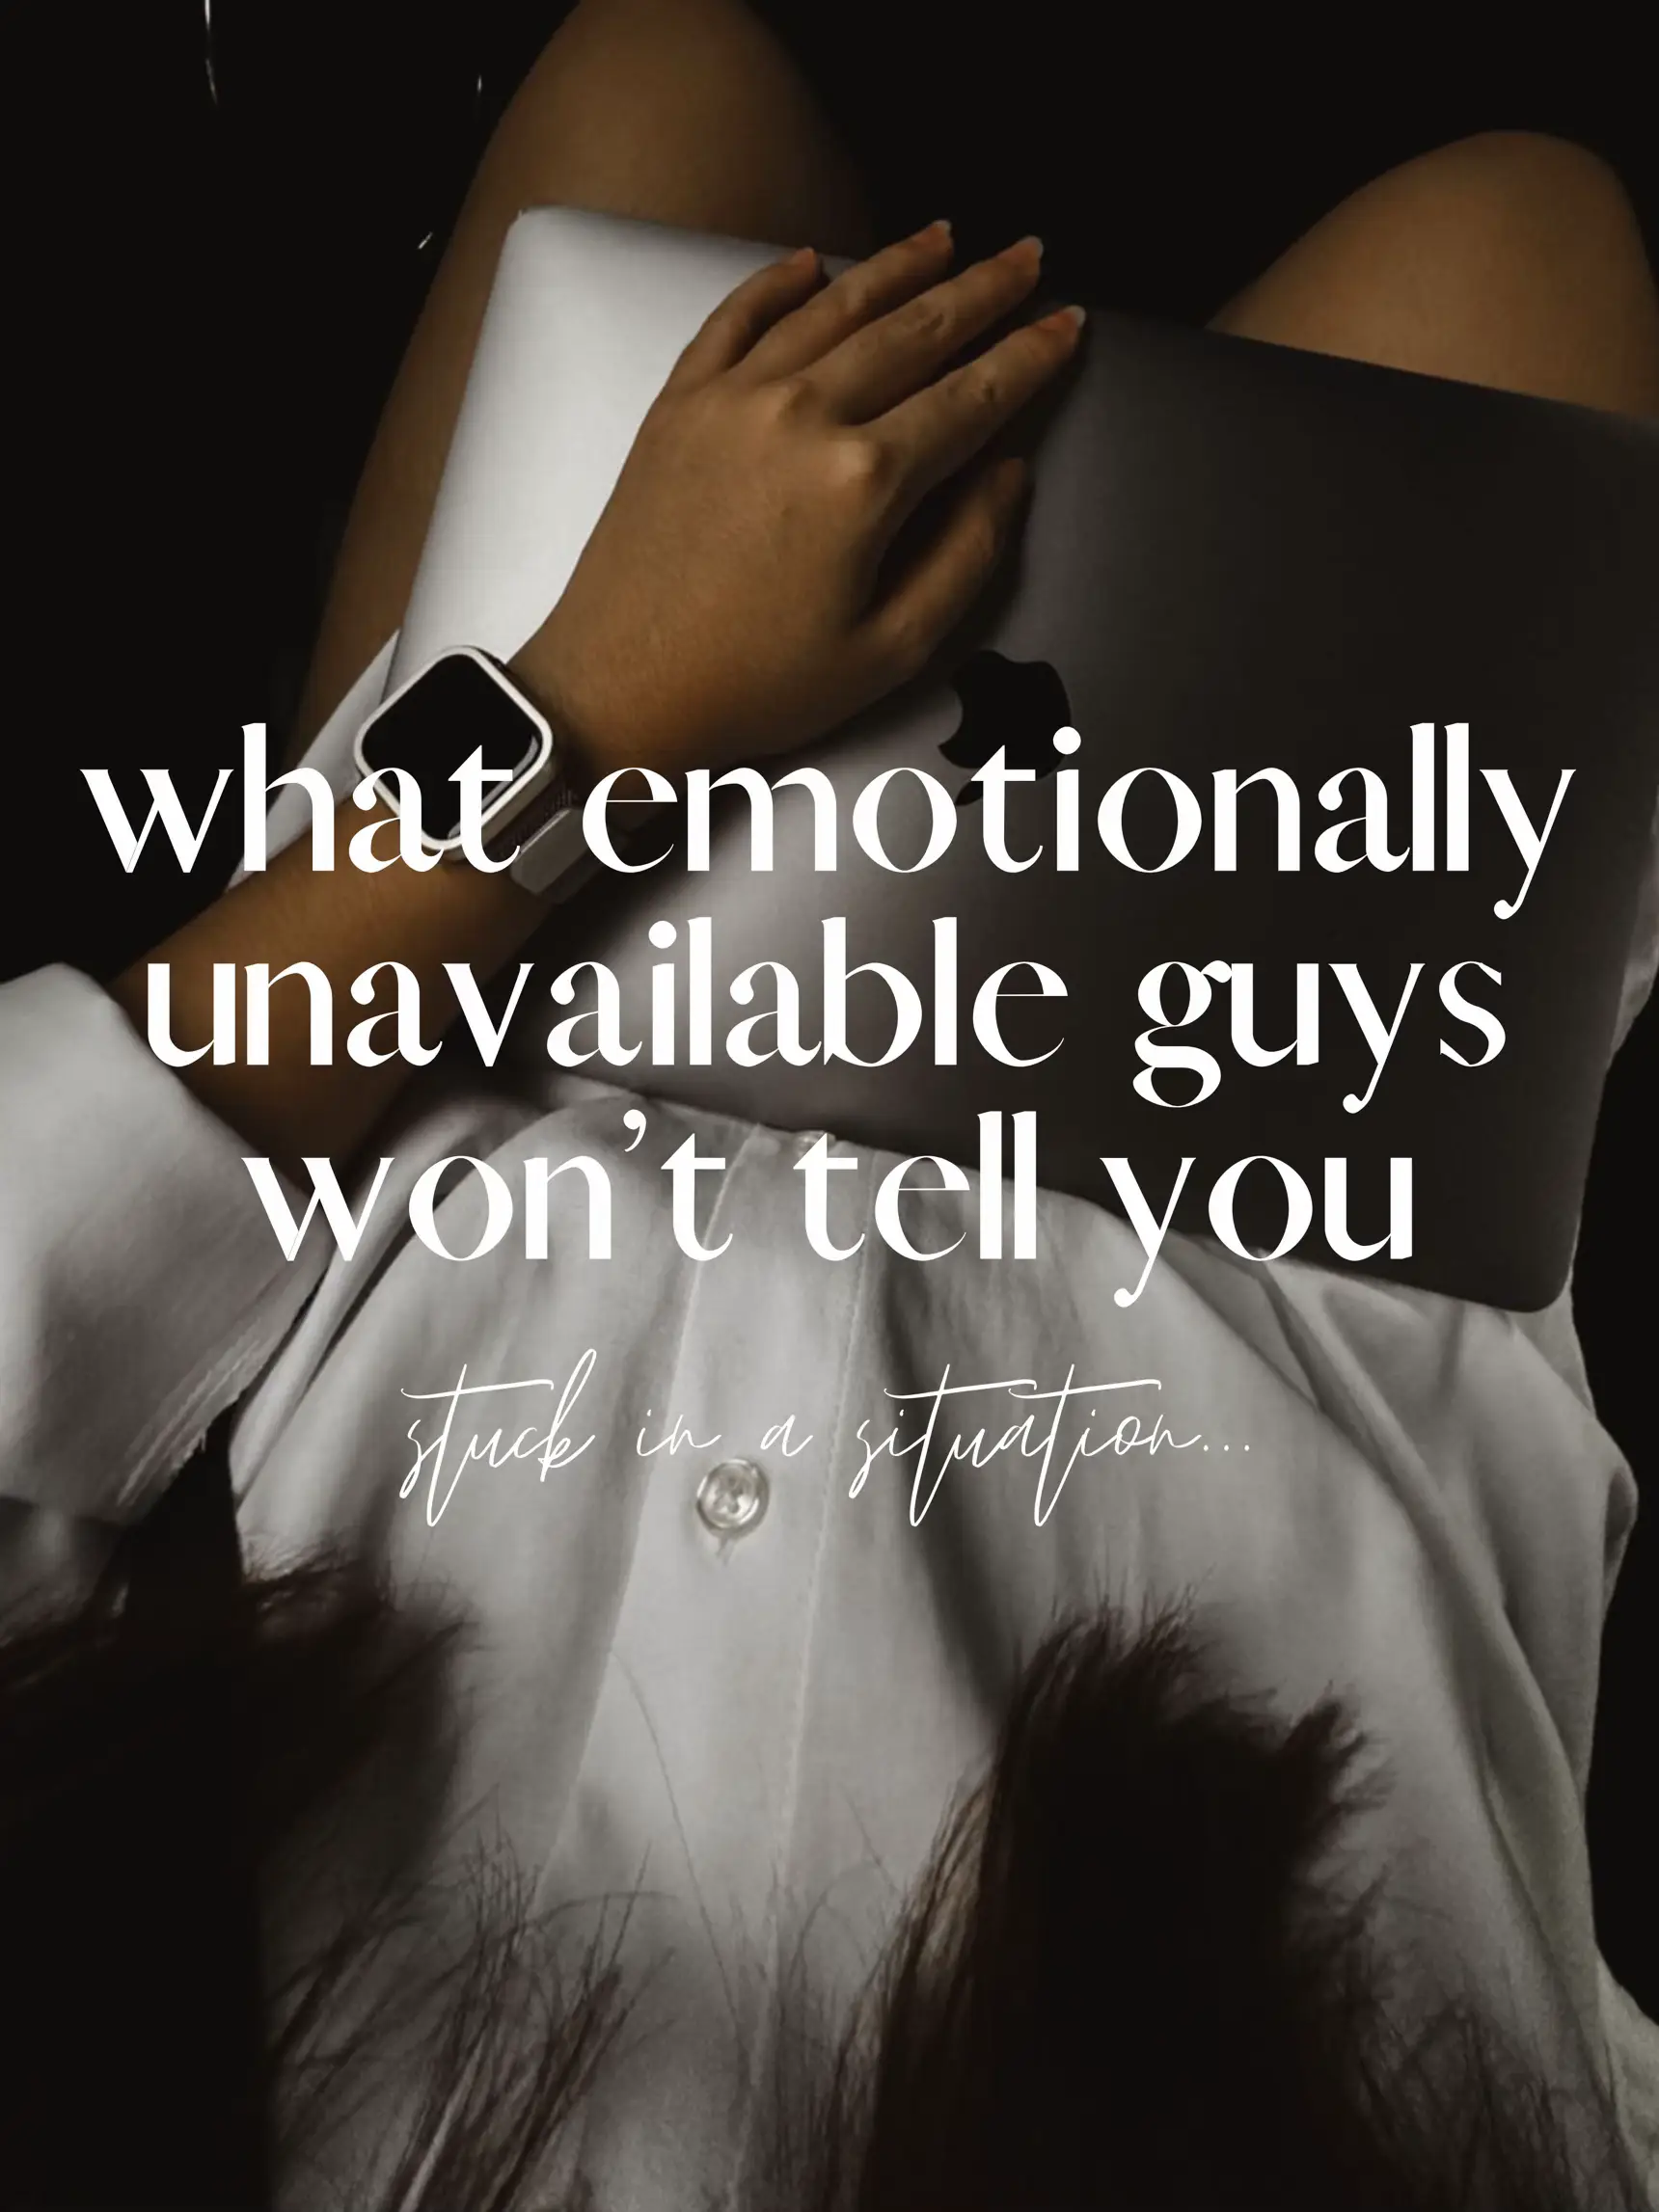 what emotionally unavailable guys won’t tell you's images(0)